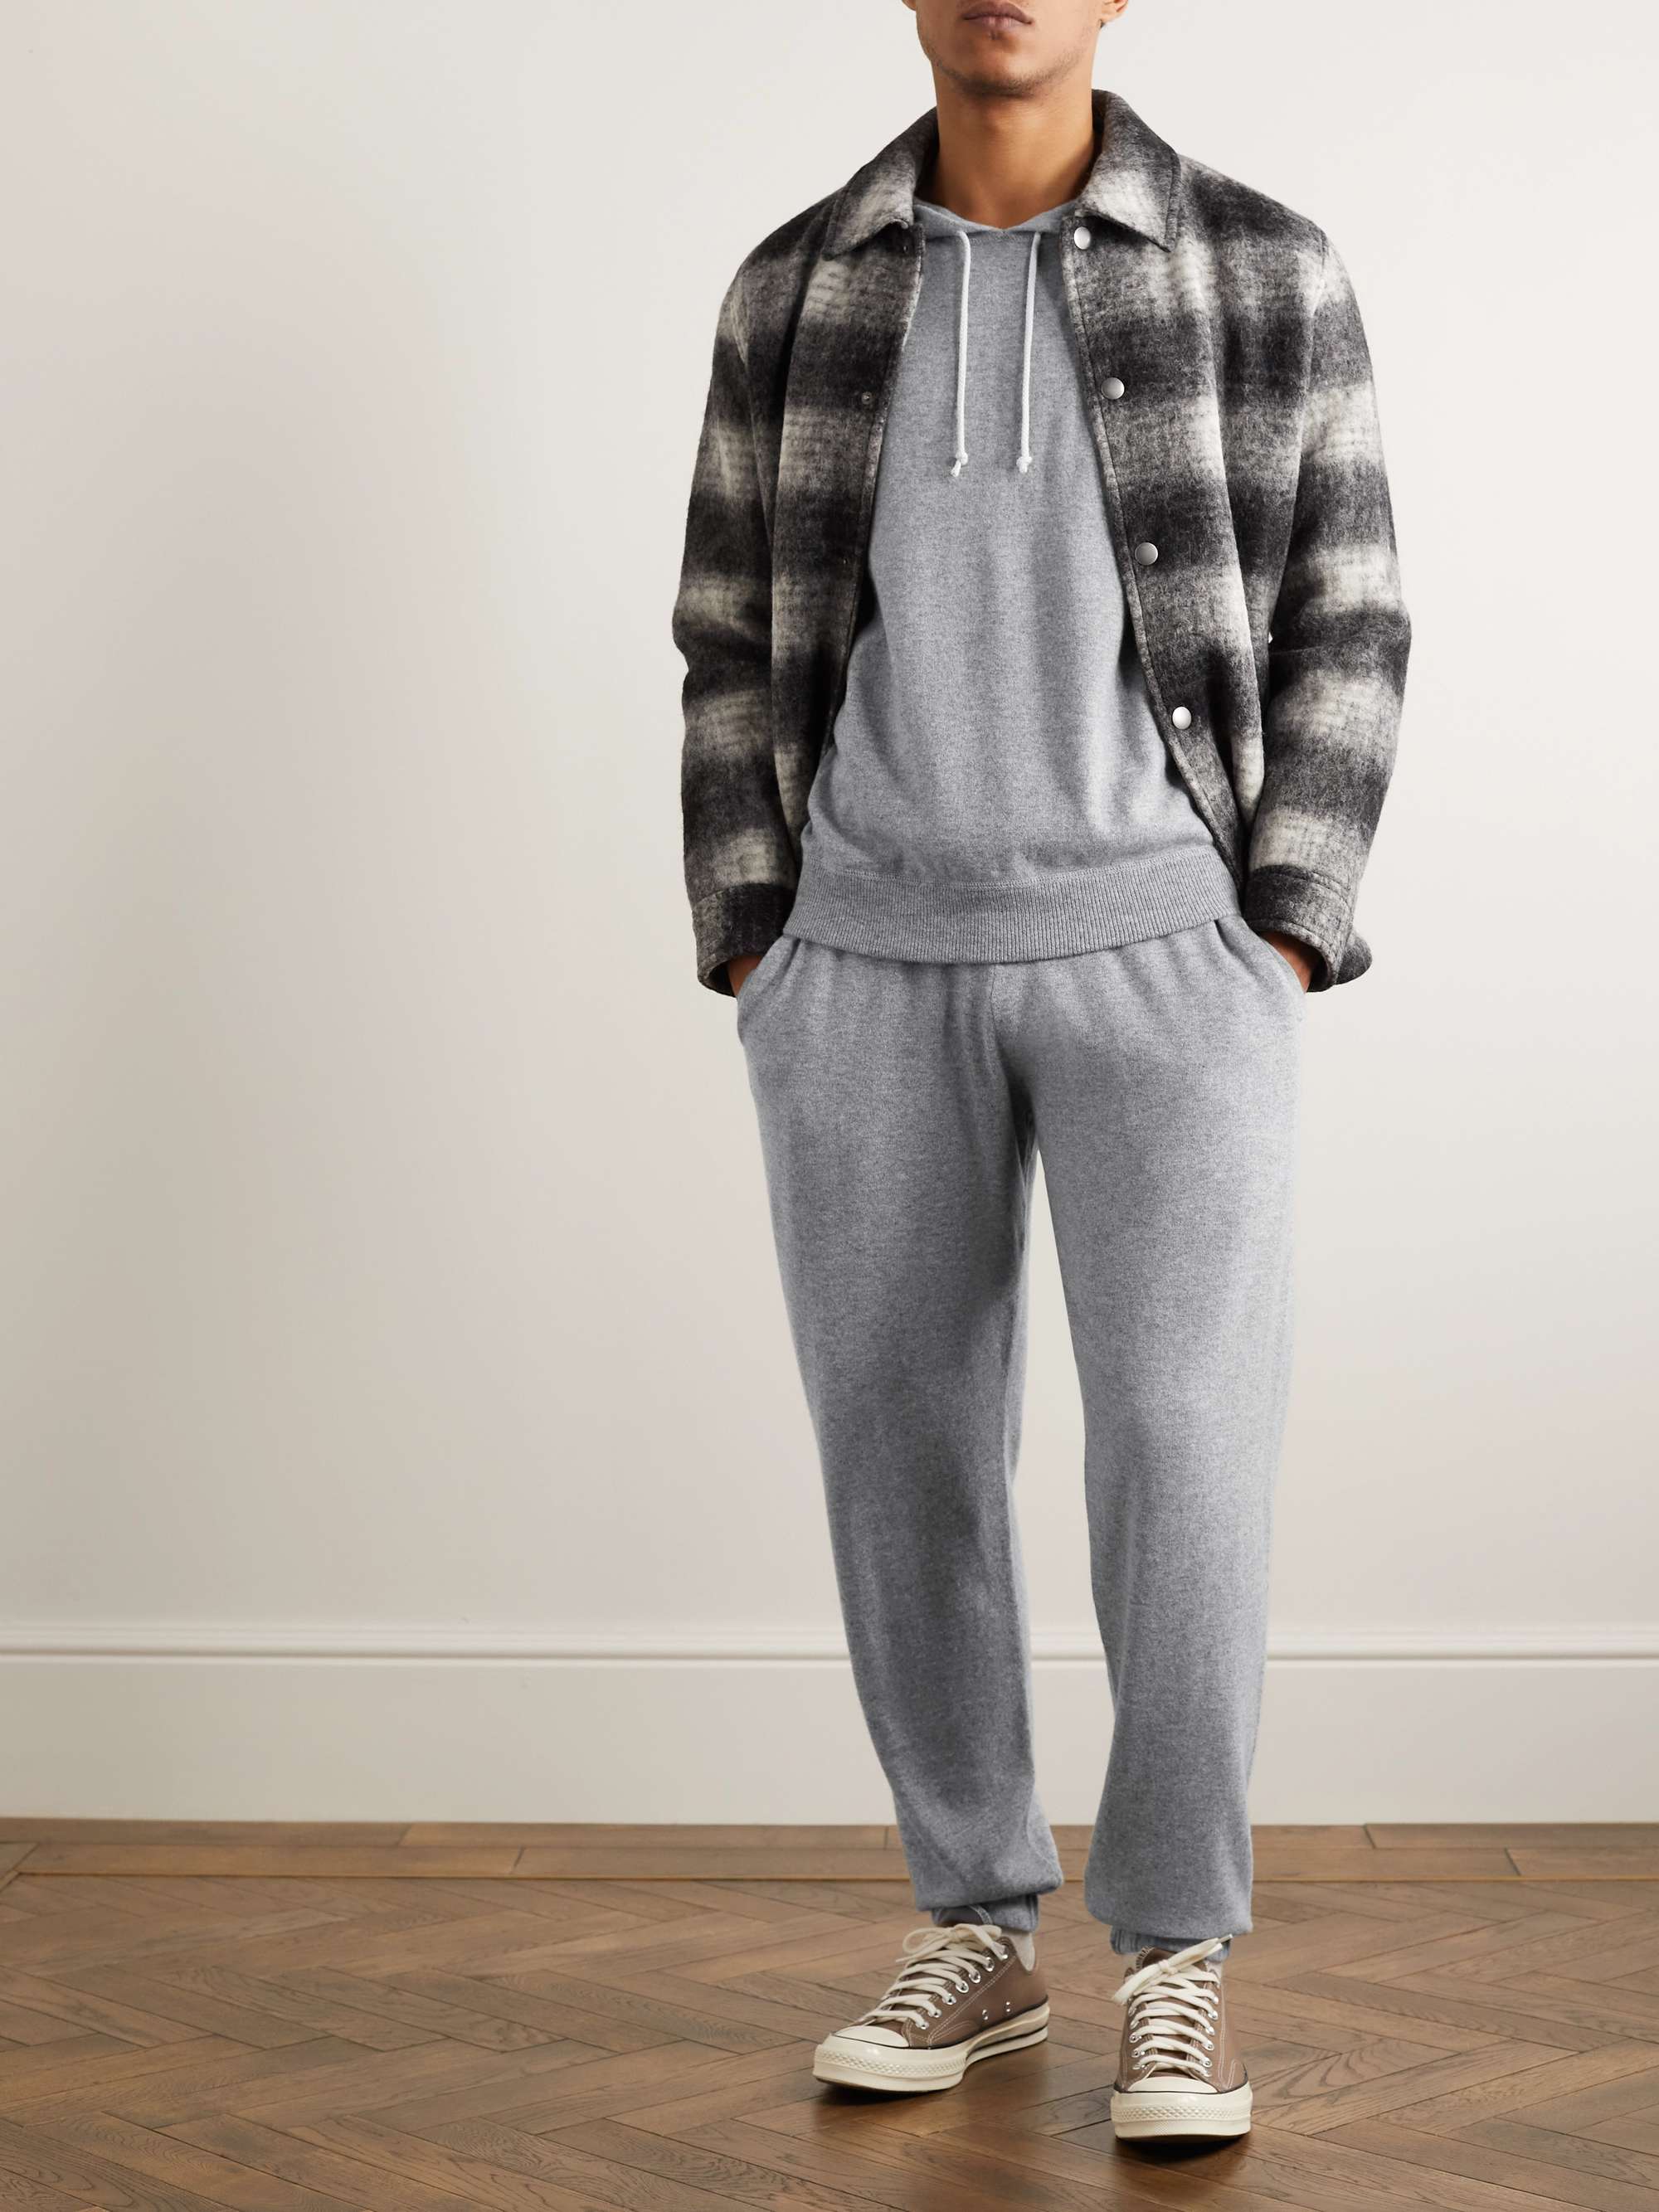 GHIAIA CASHMERE Tapered Cashmere Sweatpants for Men | MR PORTER